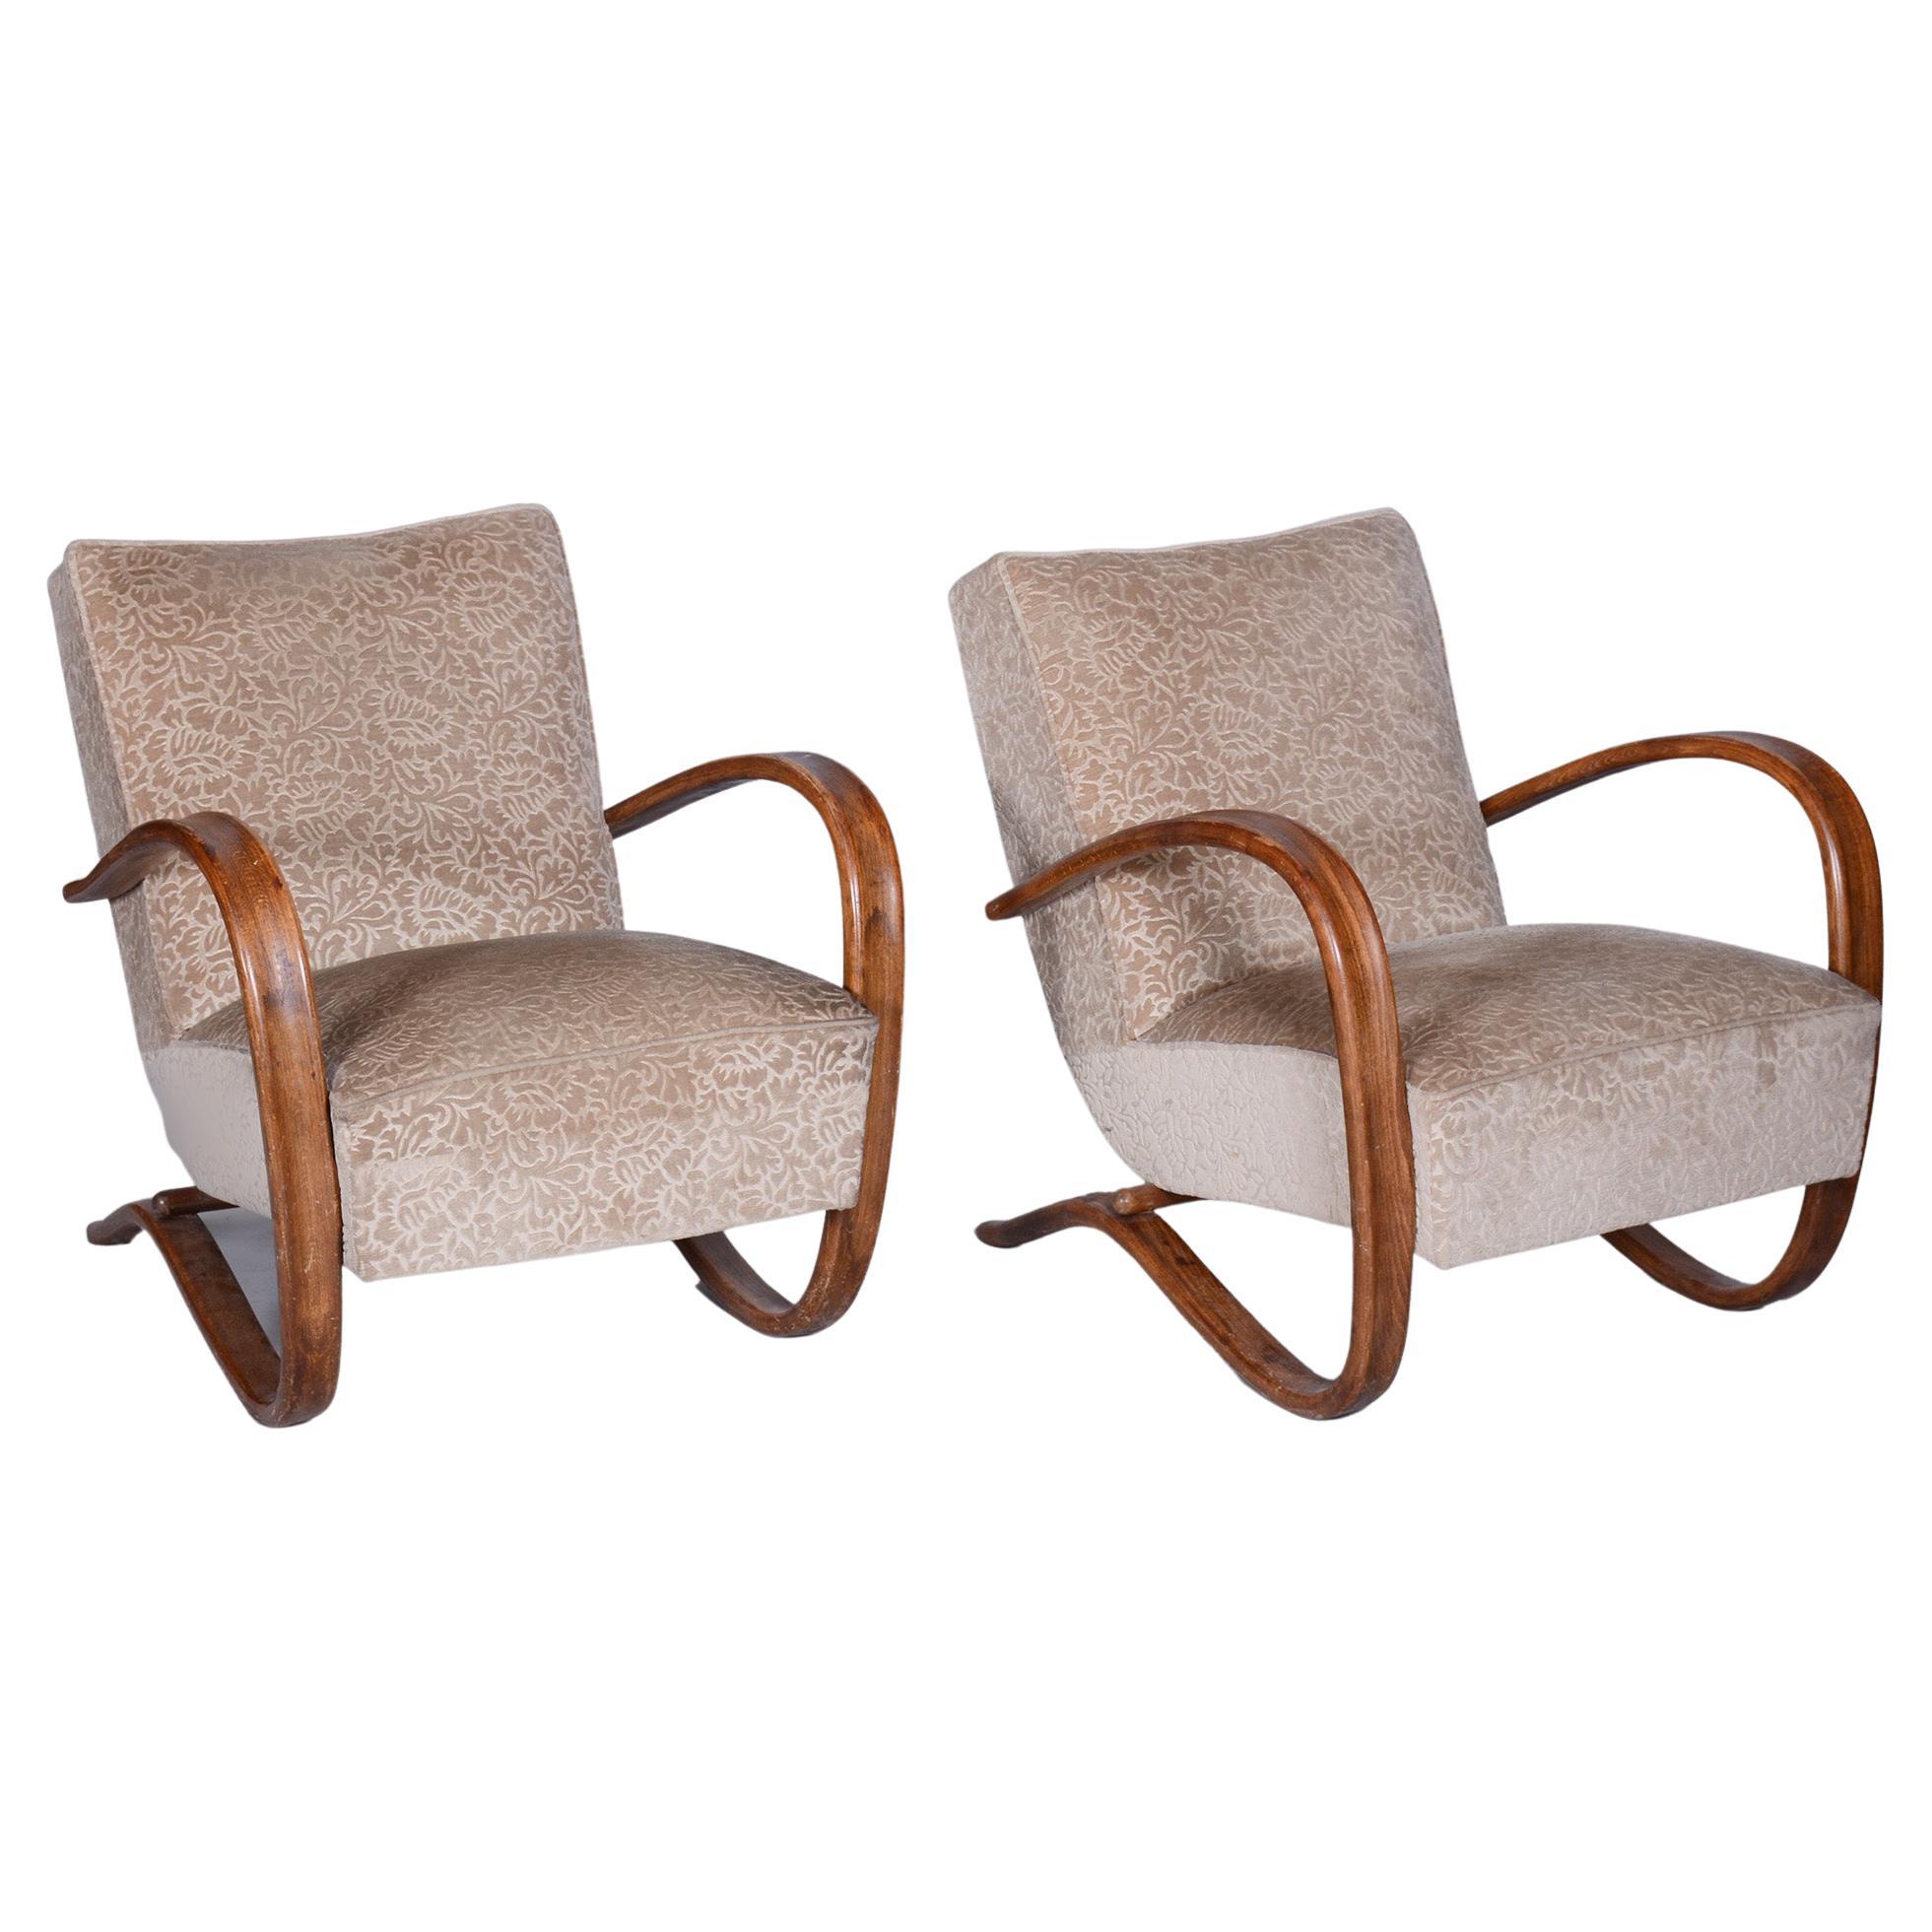 Pair of Beige H-269 Armchairs Designed by Jindrich Halabala for UP Zavody, 1930s For Sale